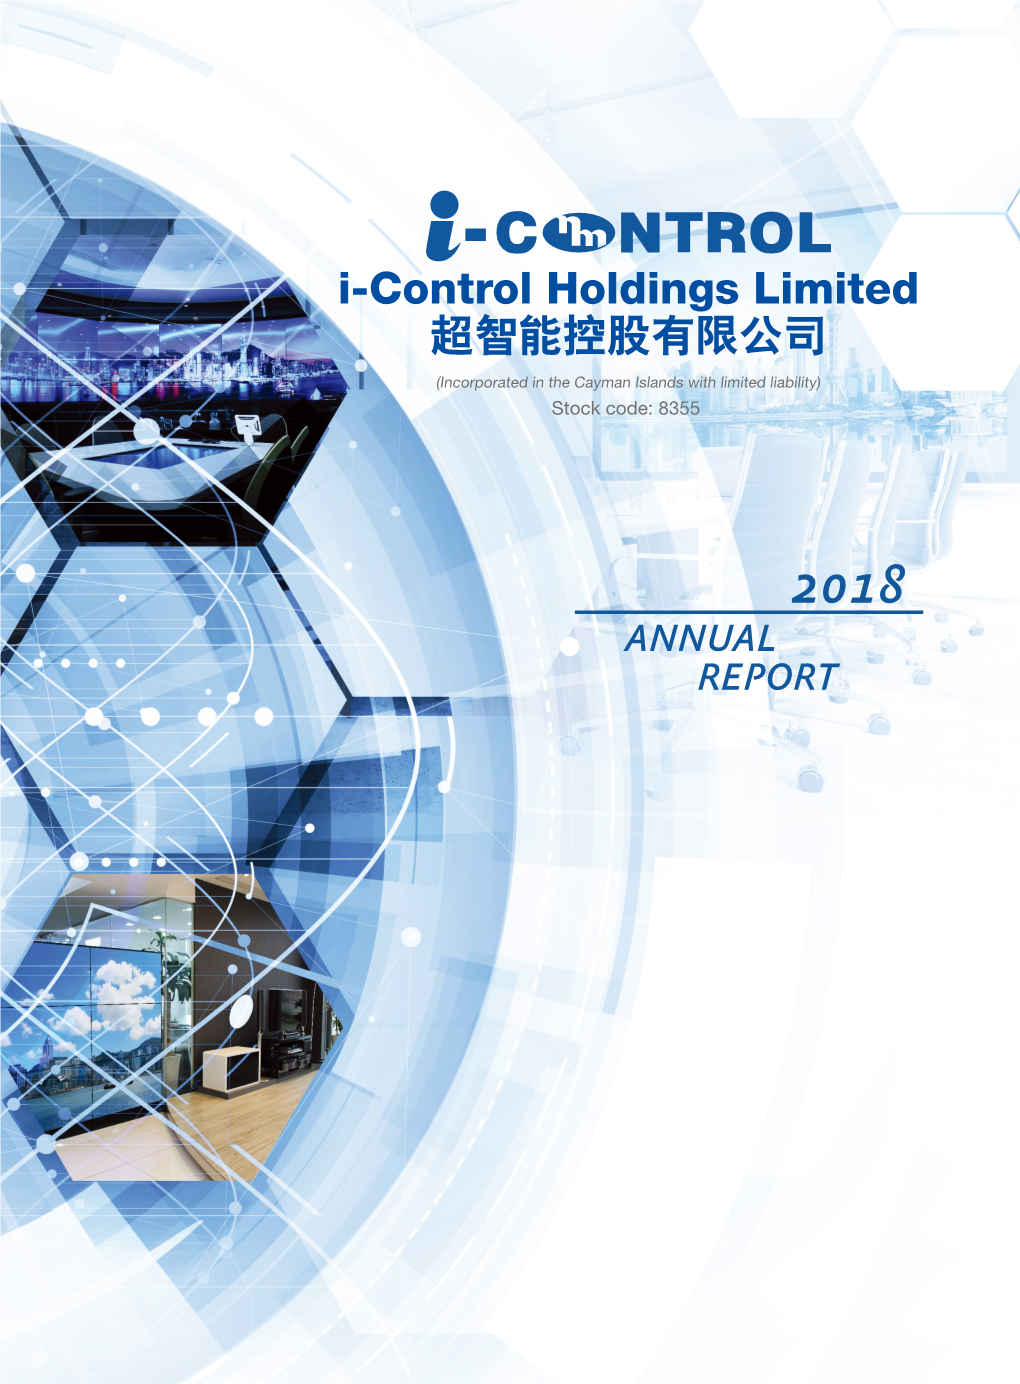 I-Control Holdings Limited 超智能控股有限公司 ANNUAL REPORT 2018 年報 Characteristics of GEM of the Stock Exchange of Hong Kong Limited (The “Stock Exchange”)